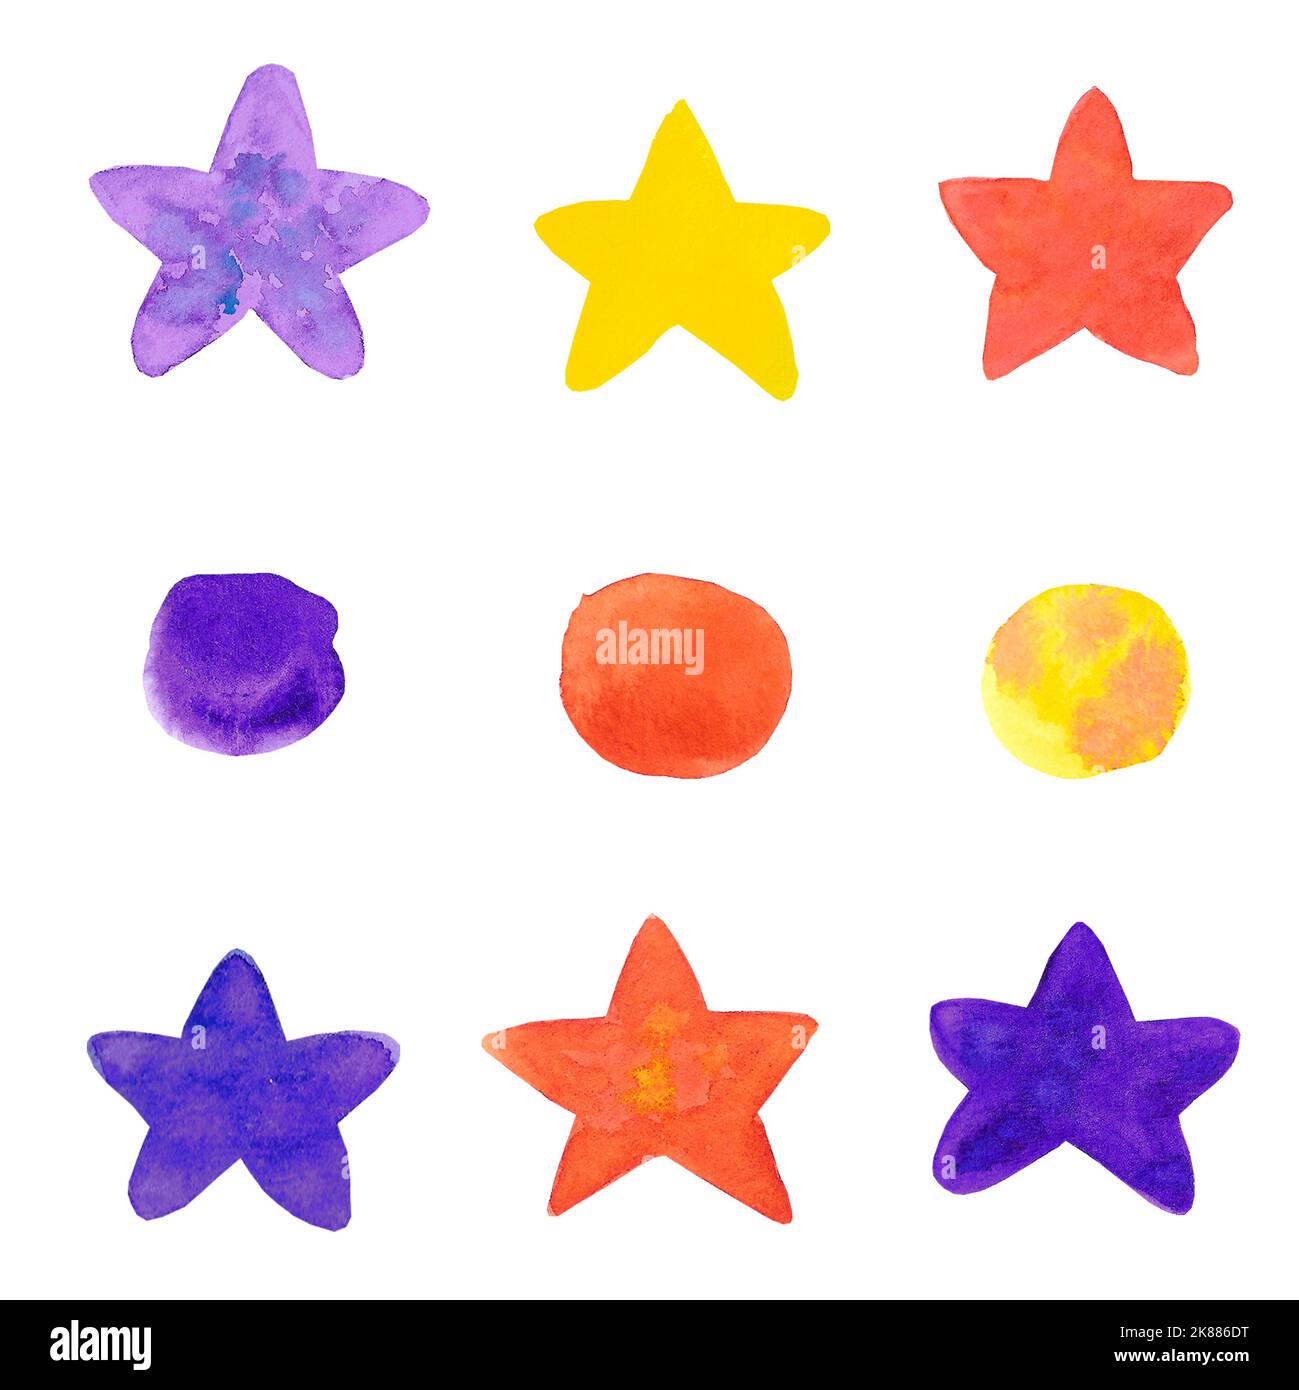 Hand drawn watercolor stars and spots on white background. Can be used for Halloween Scrapbook design, typography poster, label, banner, children text Stock Photo